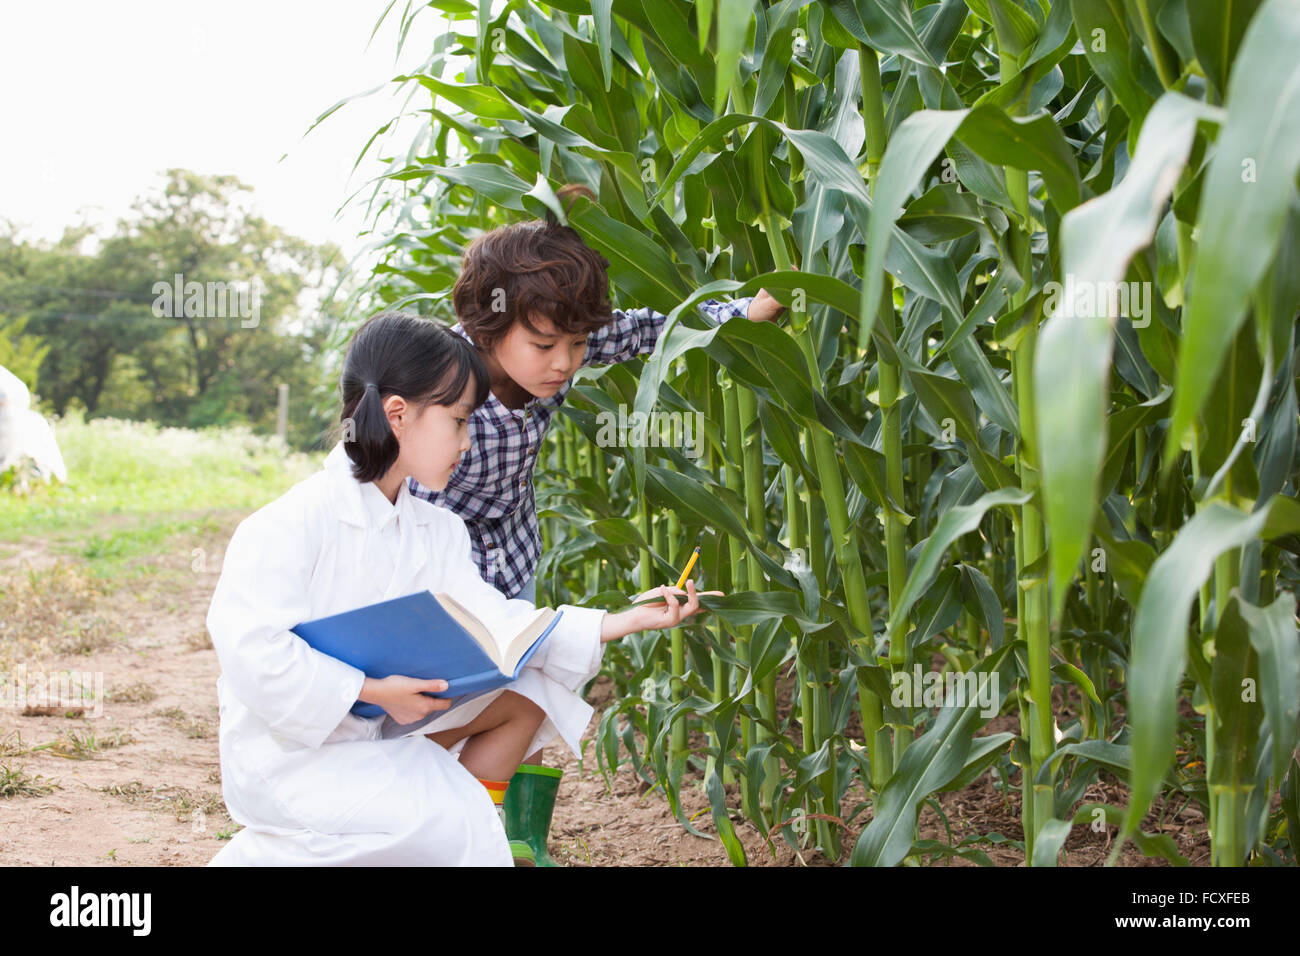 Girl in white gown sitting down on the ground at the corn field and observing with a book and a boy in casual look observing Stock Photo